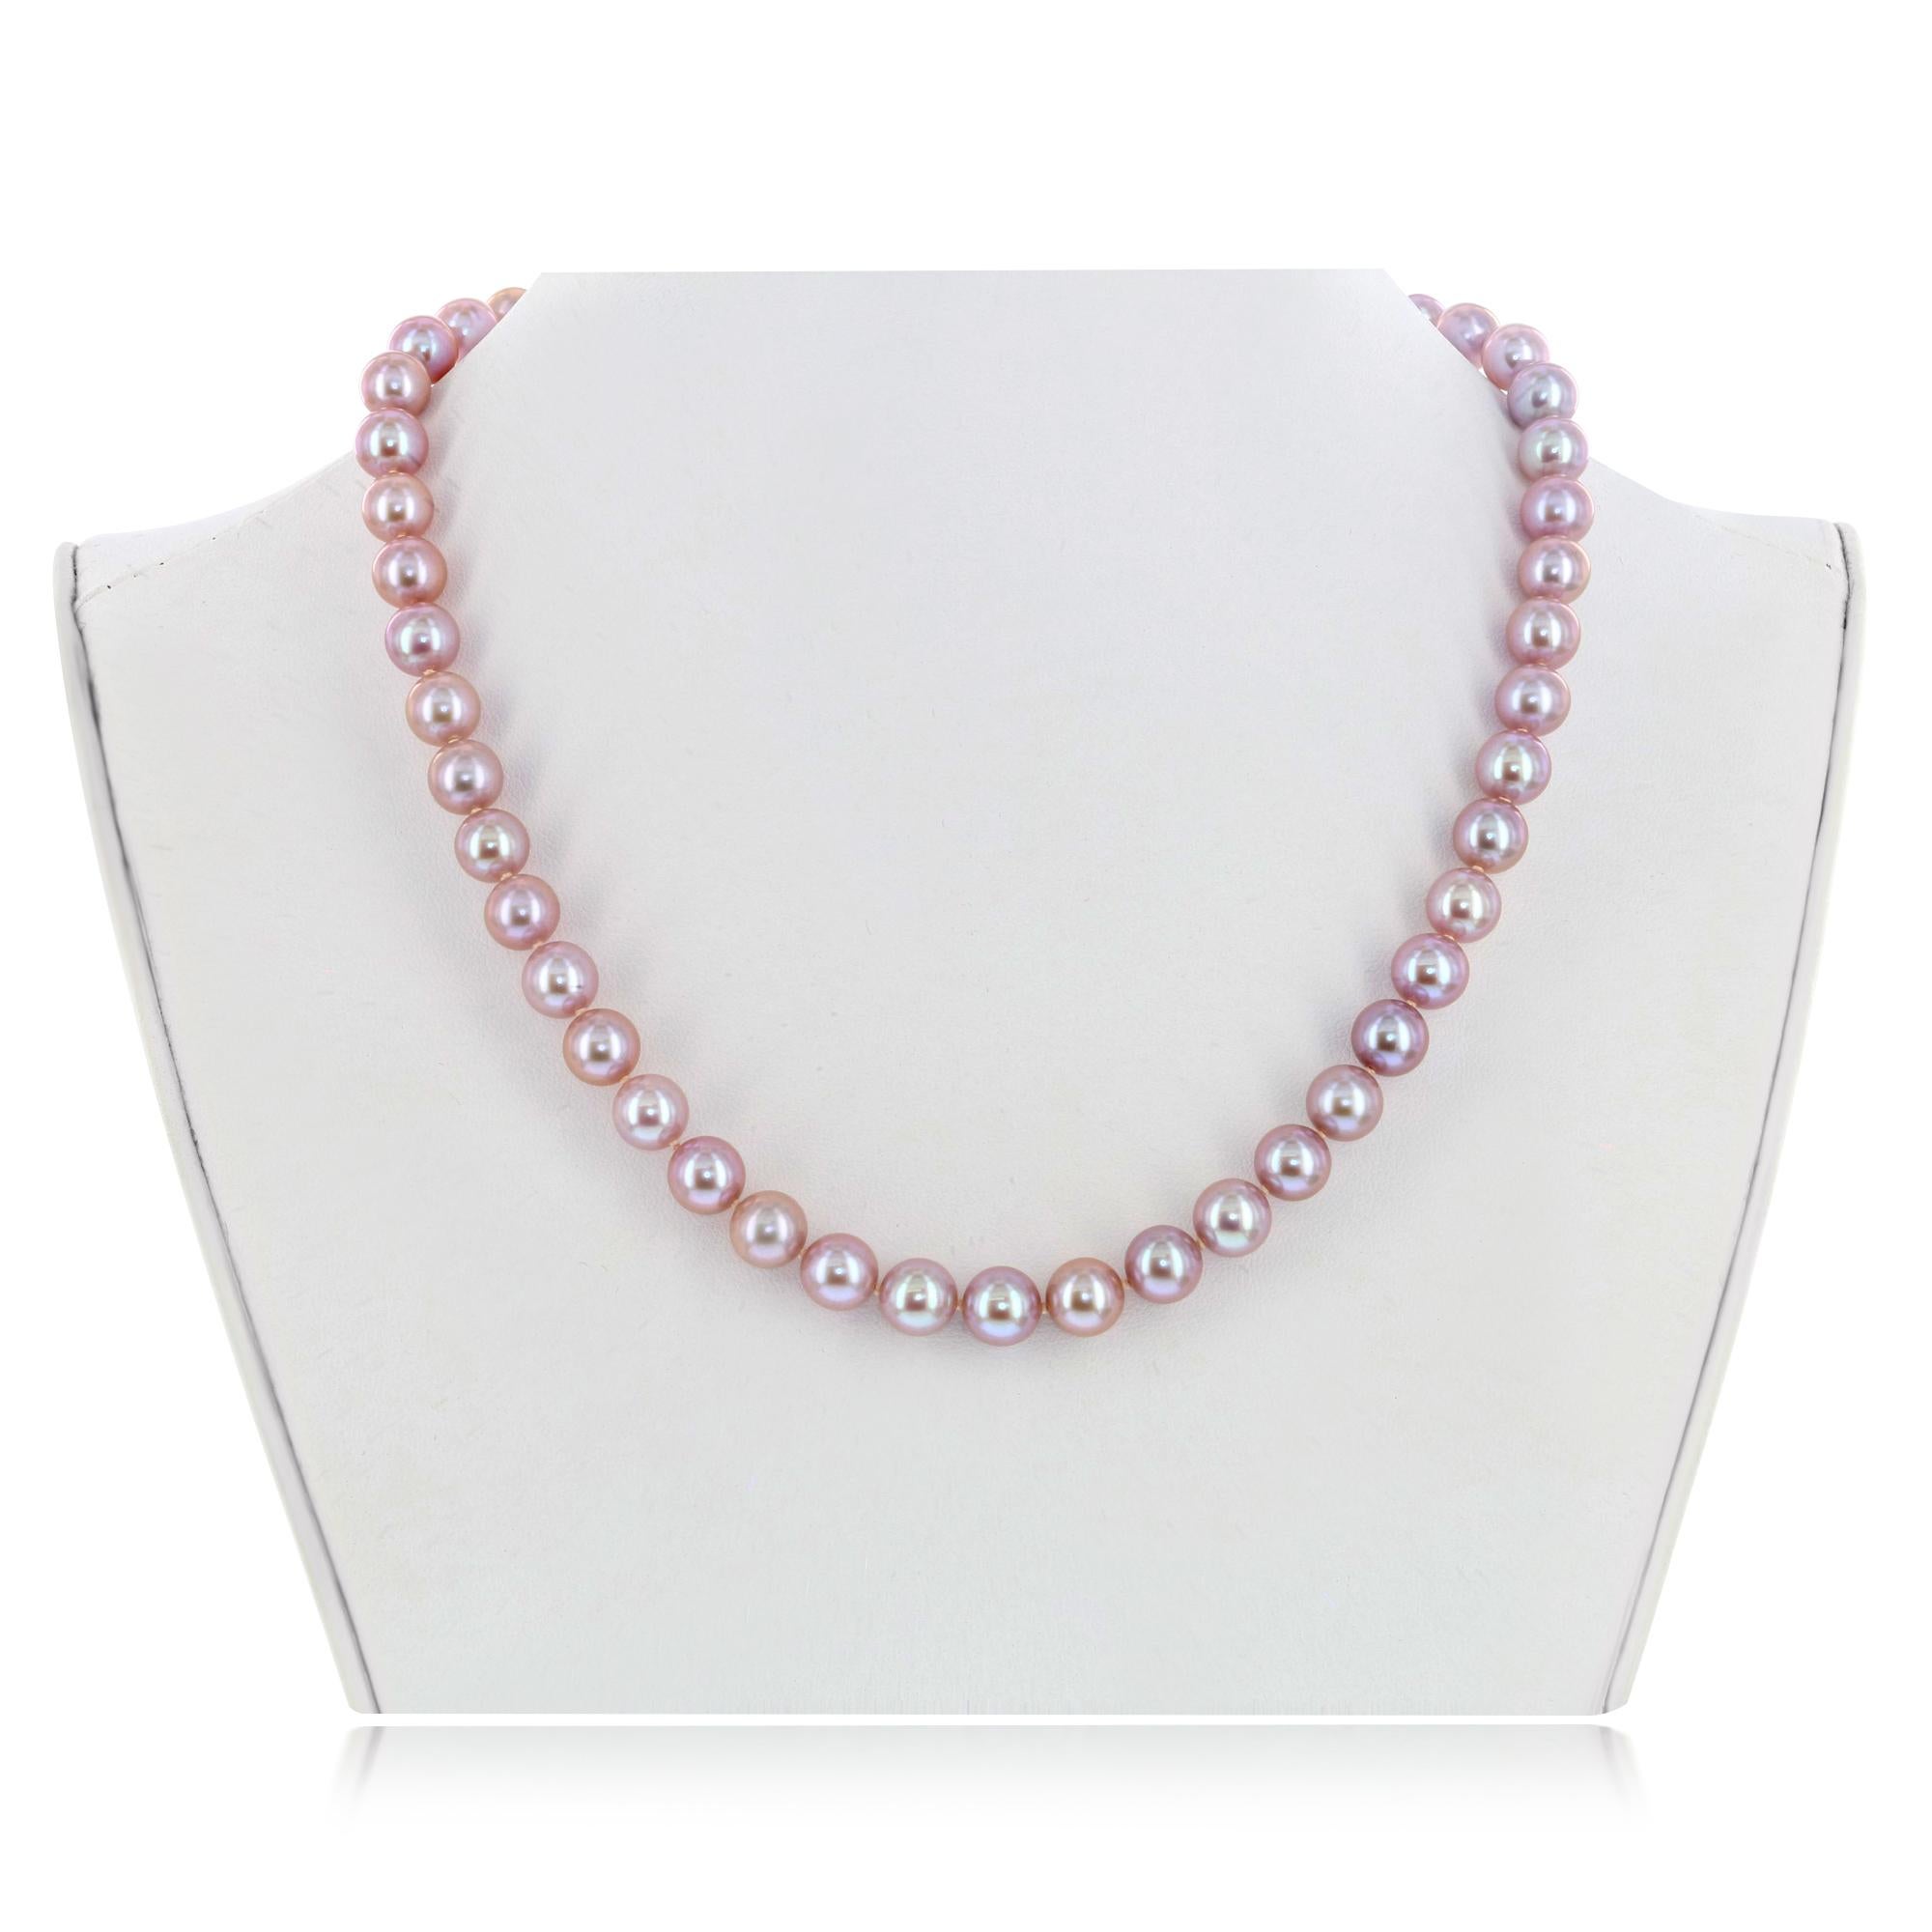 This exquisite Chinese freshwater cultured pearl necklace features distinctive, lustrous, natural color pink round pearls measuring 7-7.5mm. The necklace is strung with a classic 14K white gold filigree clasp.
This necklace makes the perfect